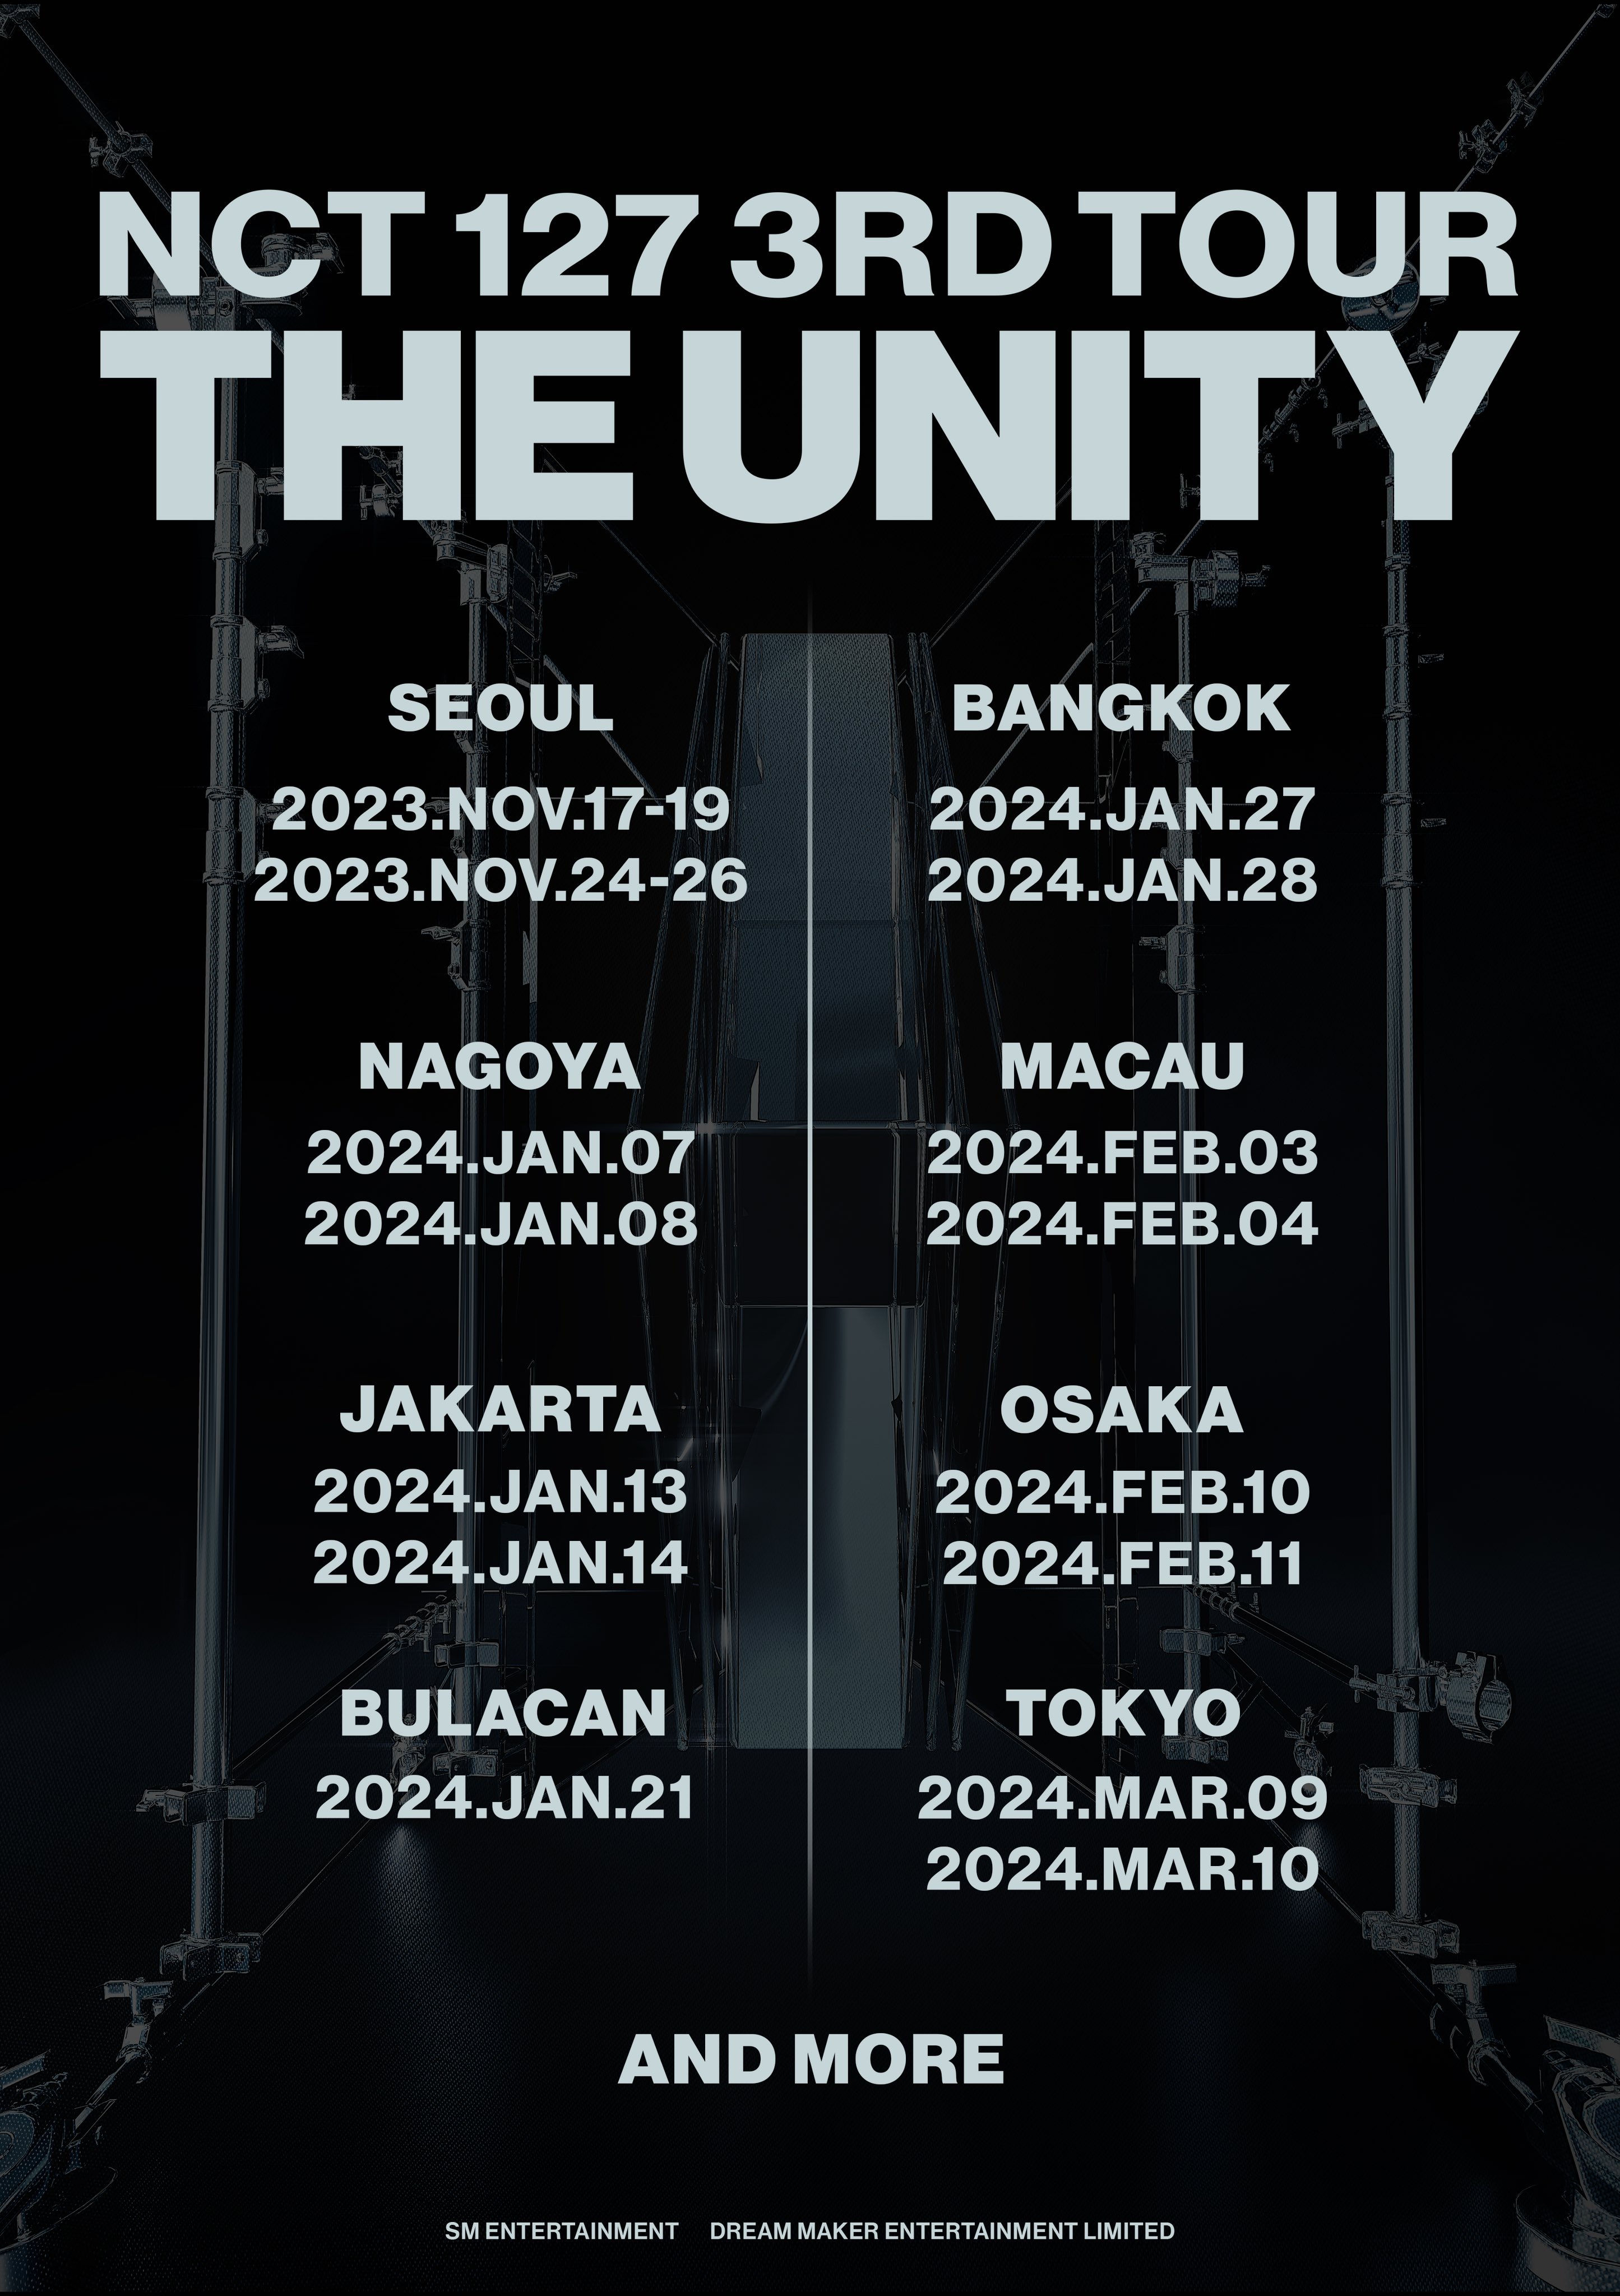 NCT 127 3RD TOUR ‘NEO CITY : SEOUL - THE UNITY’